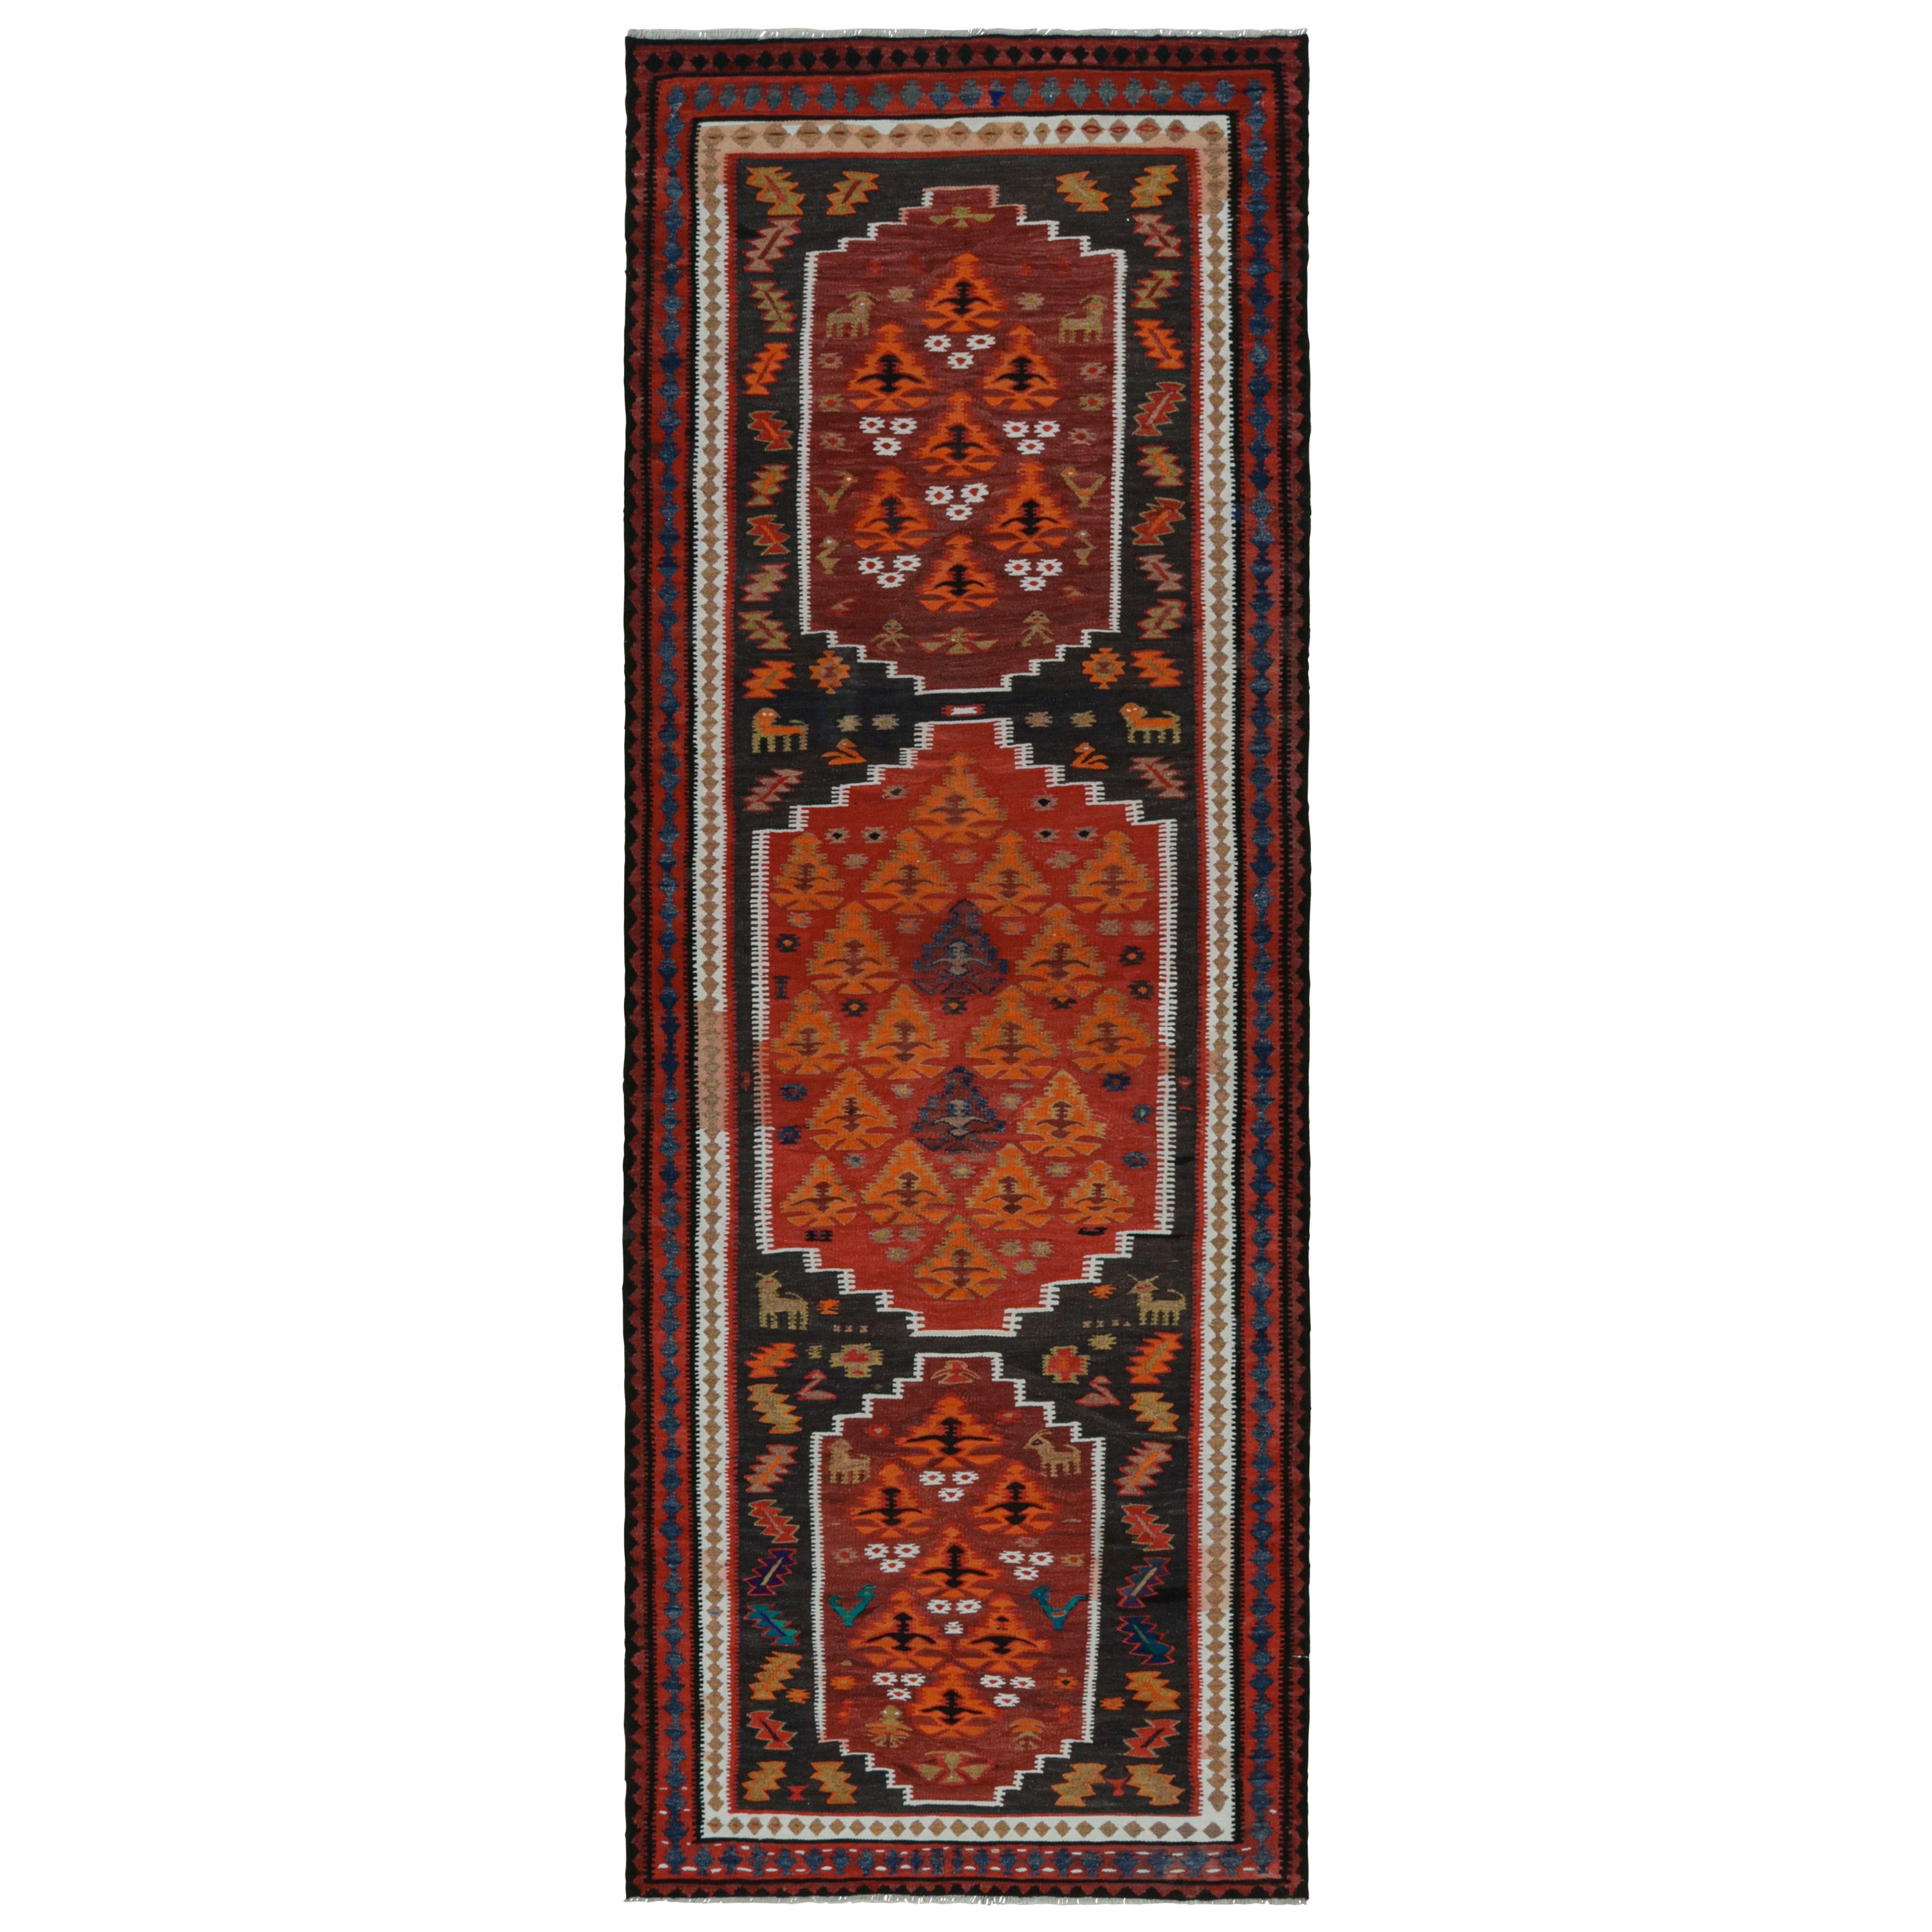 Vintage tribal Persian Kilim runner rug, with Pictorial motifs, from Rug & Kilim For Sale